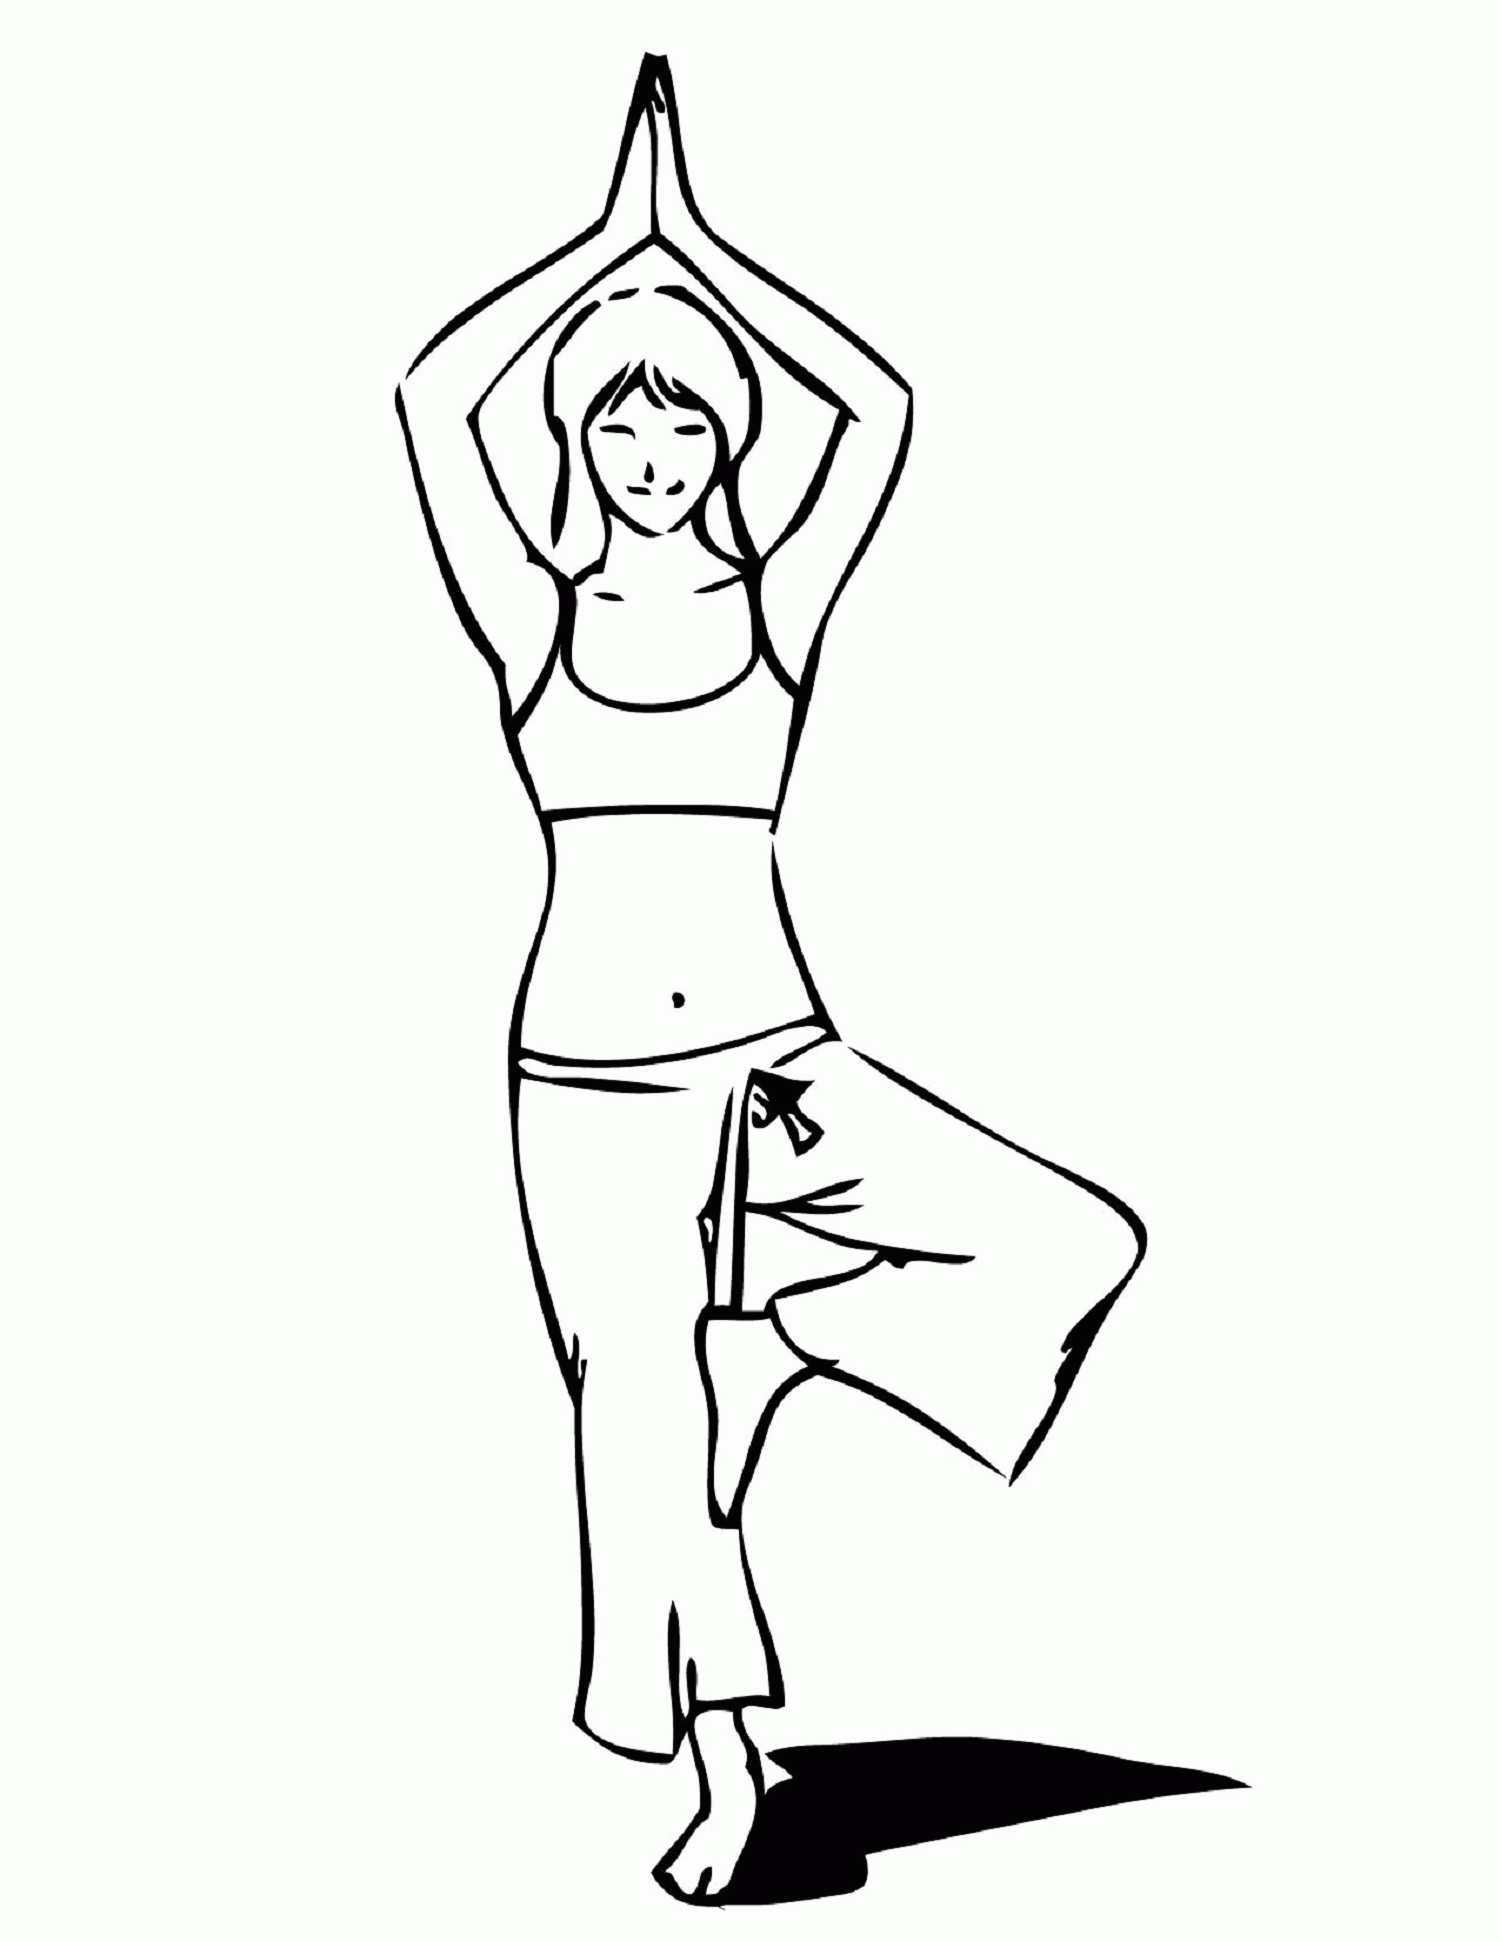 Yoga Coloring Pages for Kid Sport Introduction | Dear Joya